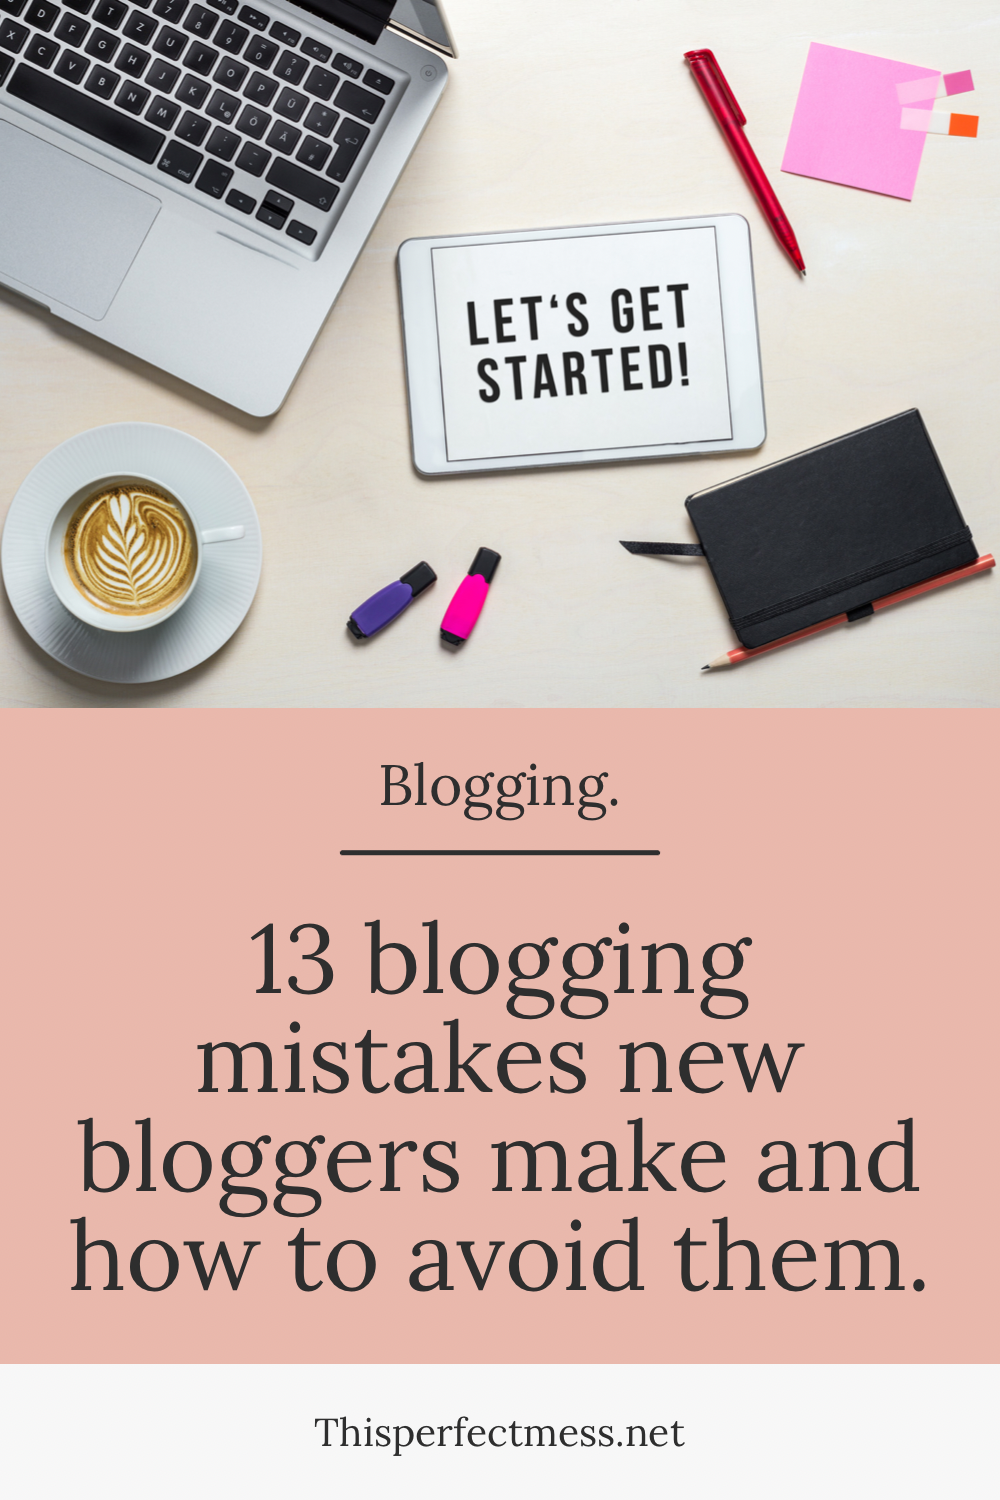 13 blogging mistake that new bloggers make and how to avoid them